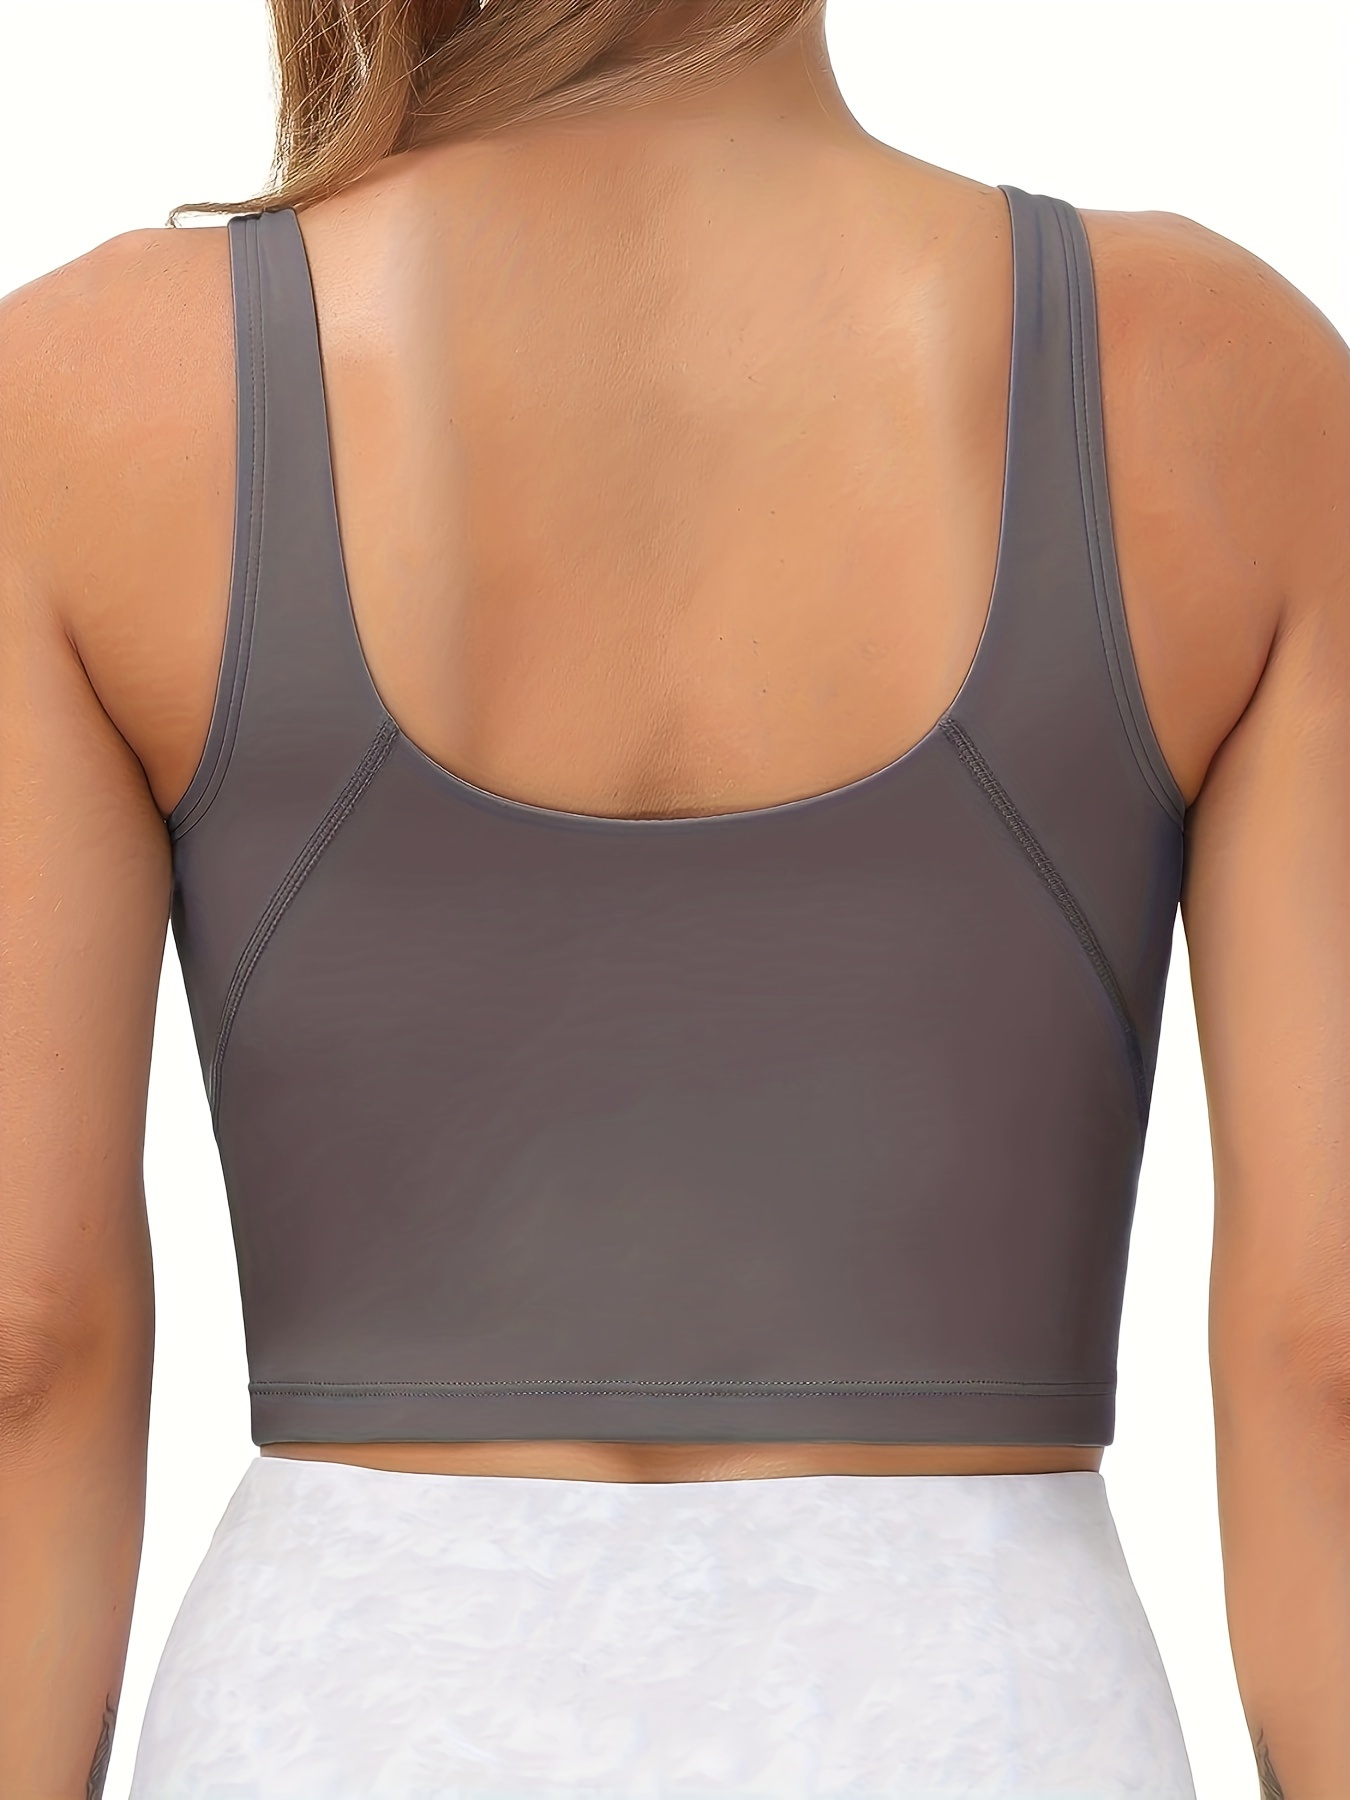 Sports Bras for Womens Workout Yoga Tank Top Women with Chest Pad